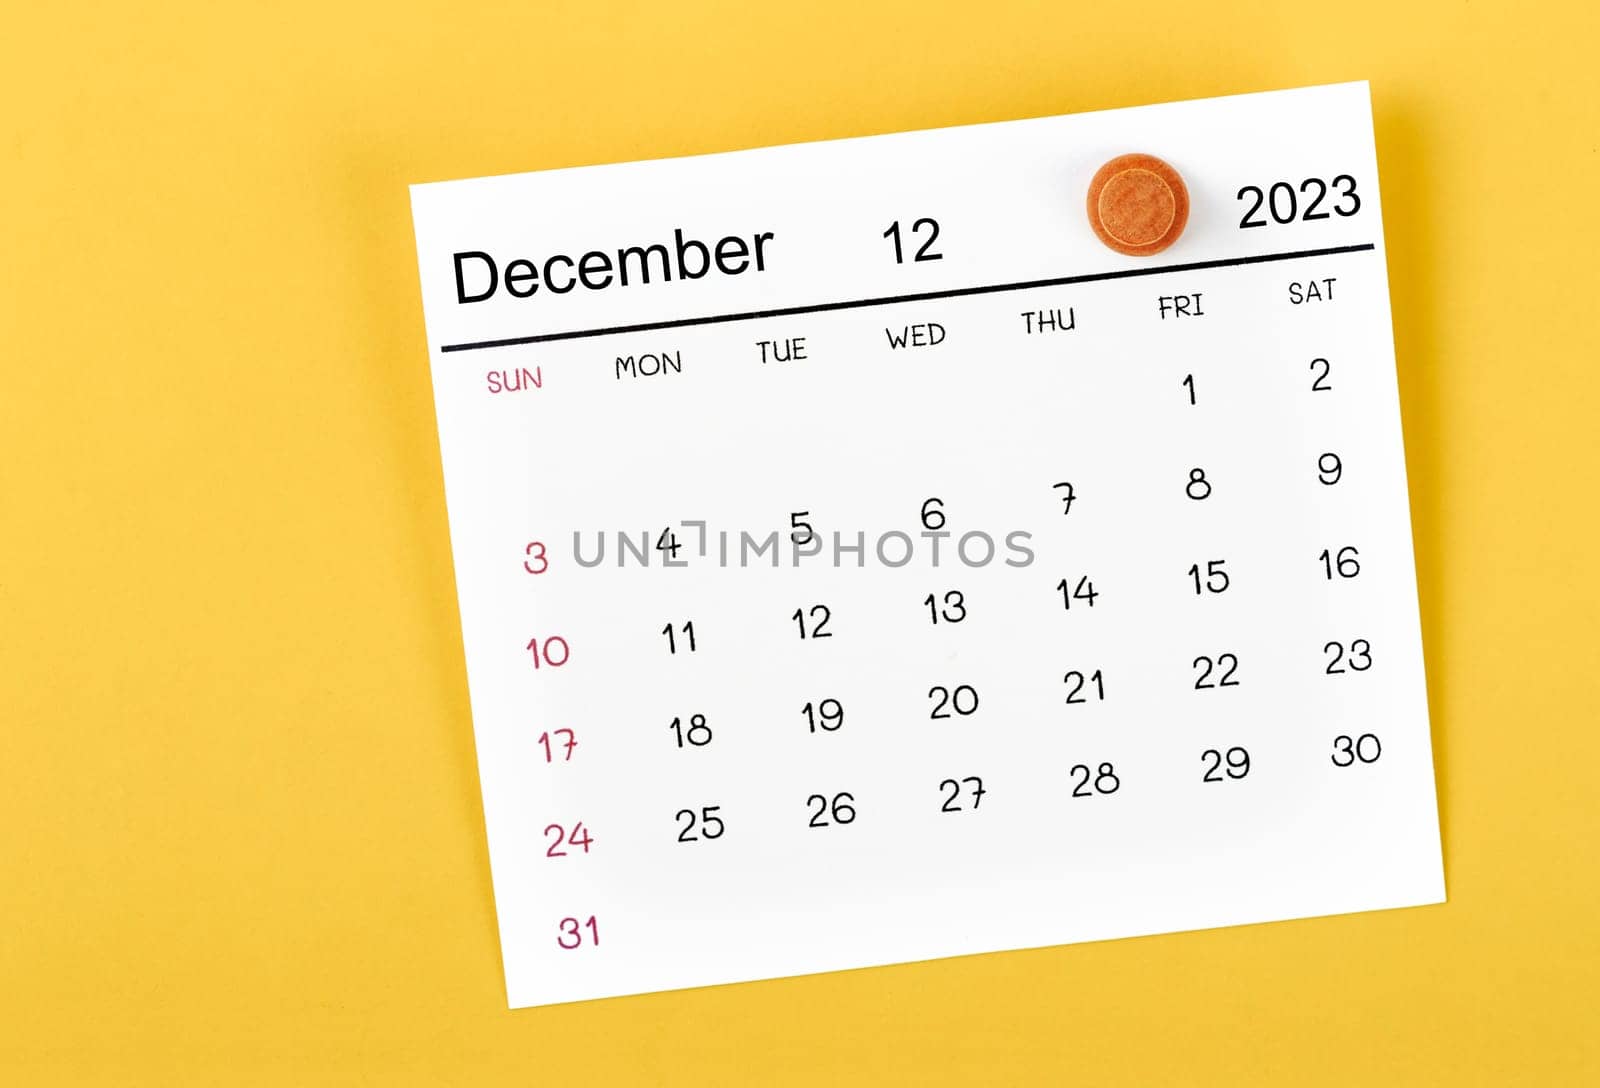 The December 2023 and wooden push pin on yellow background. by Gamjai